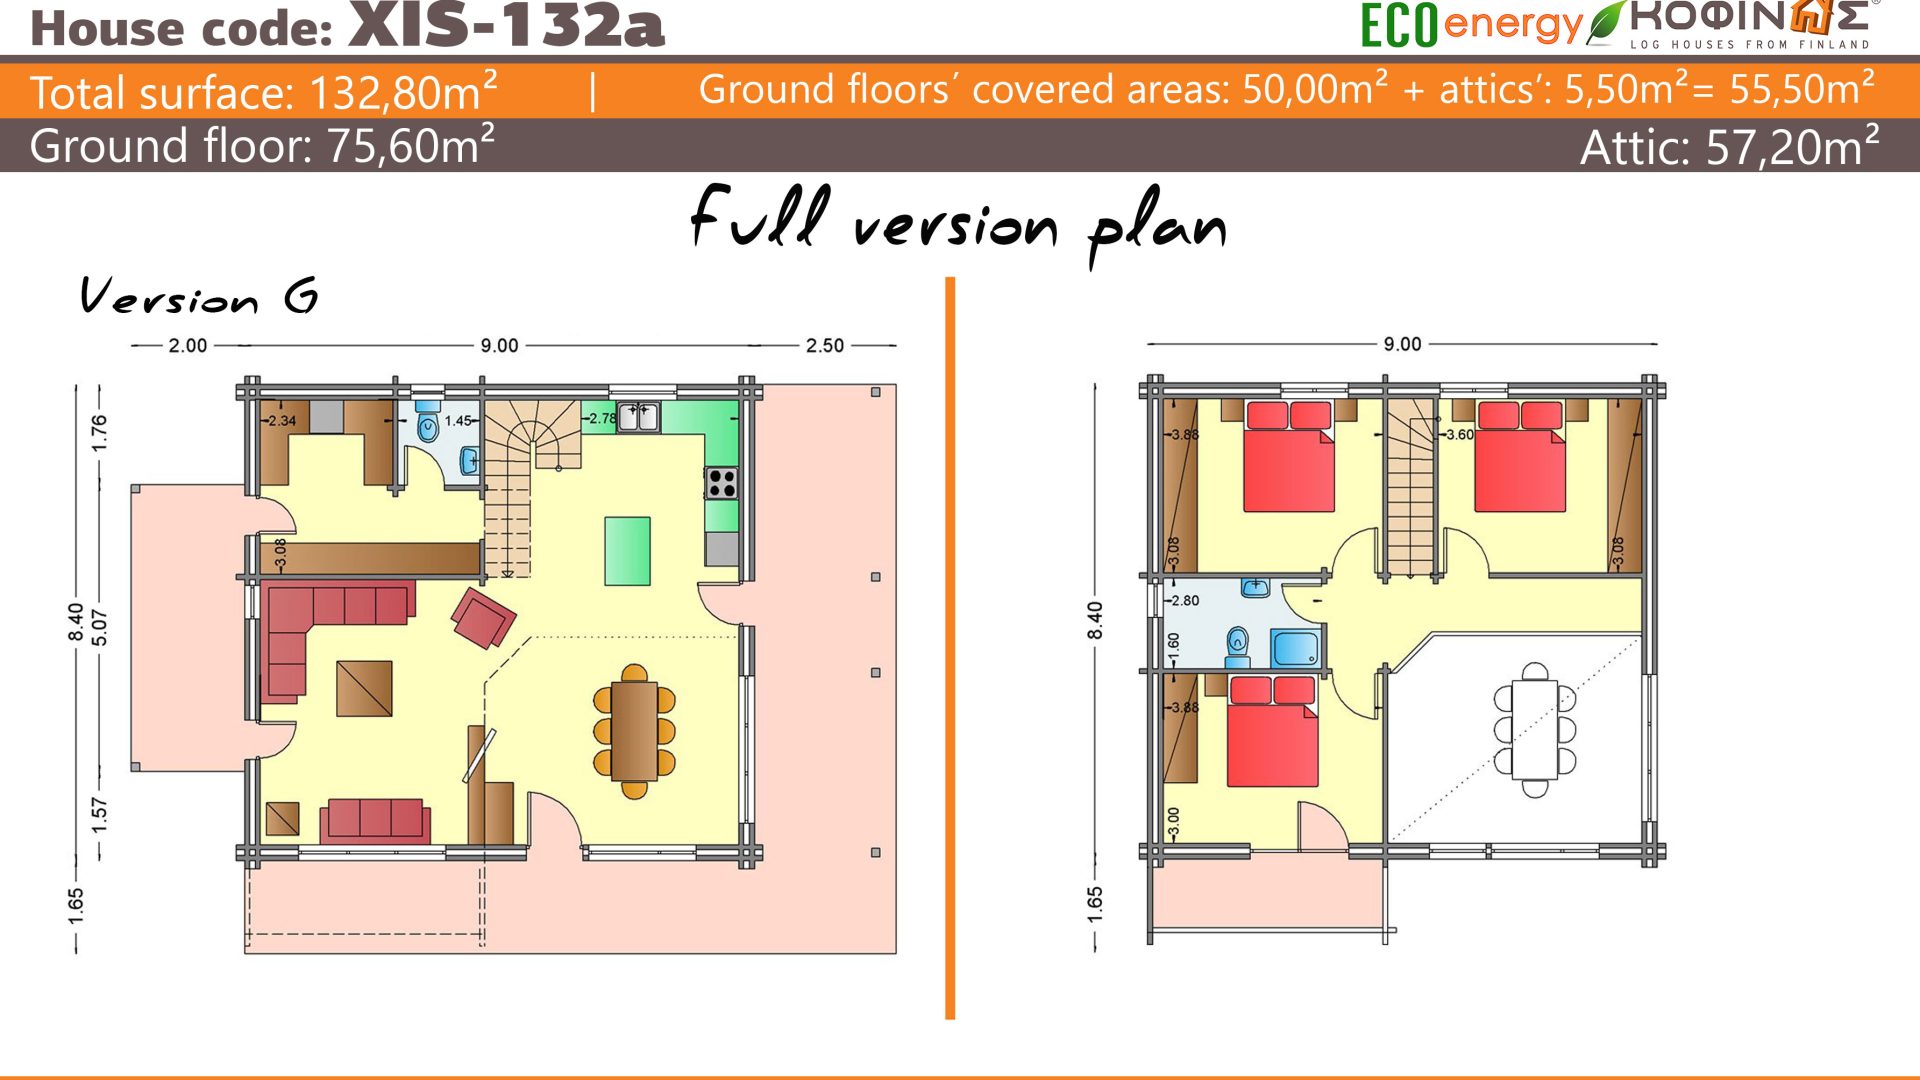 1-story with attic log house XIS-132a, total surface of 132,80 m²